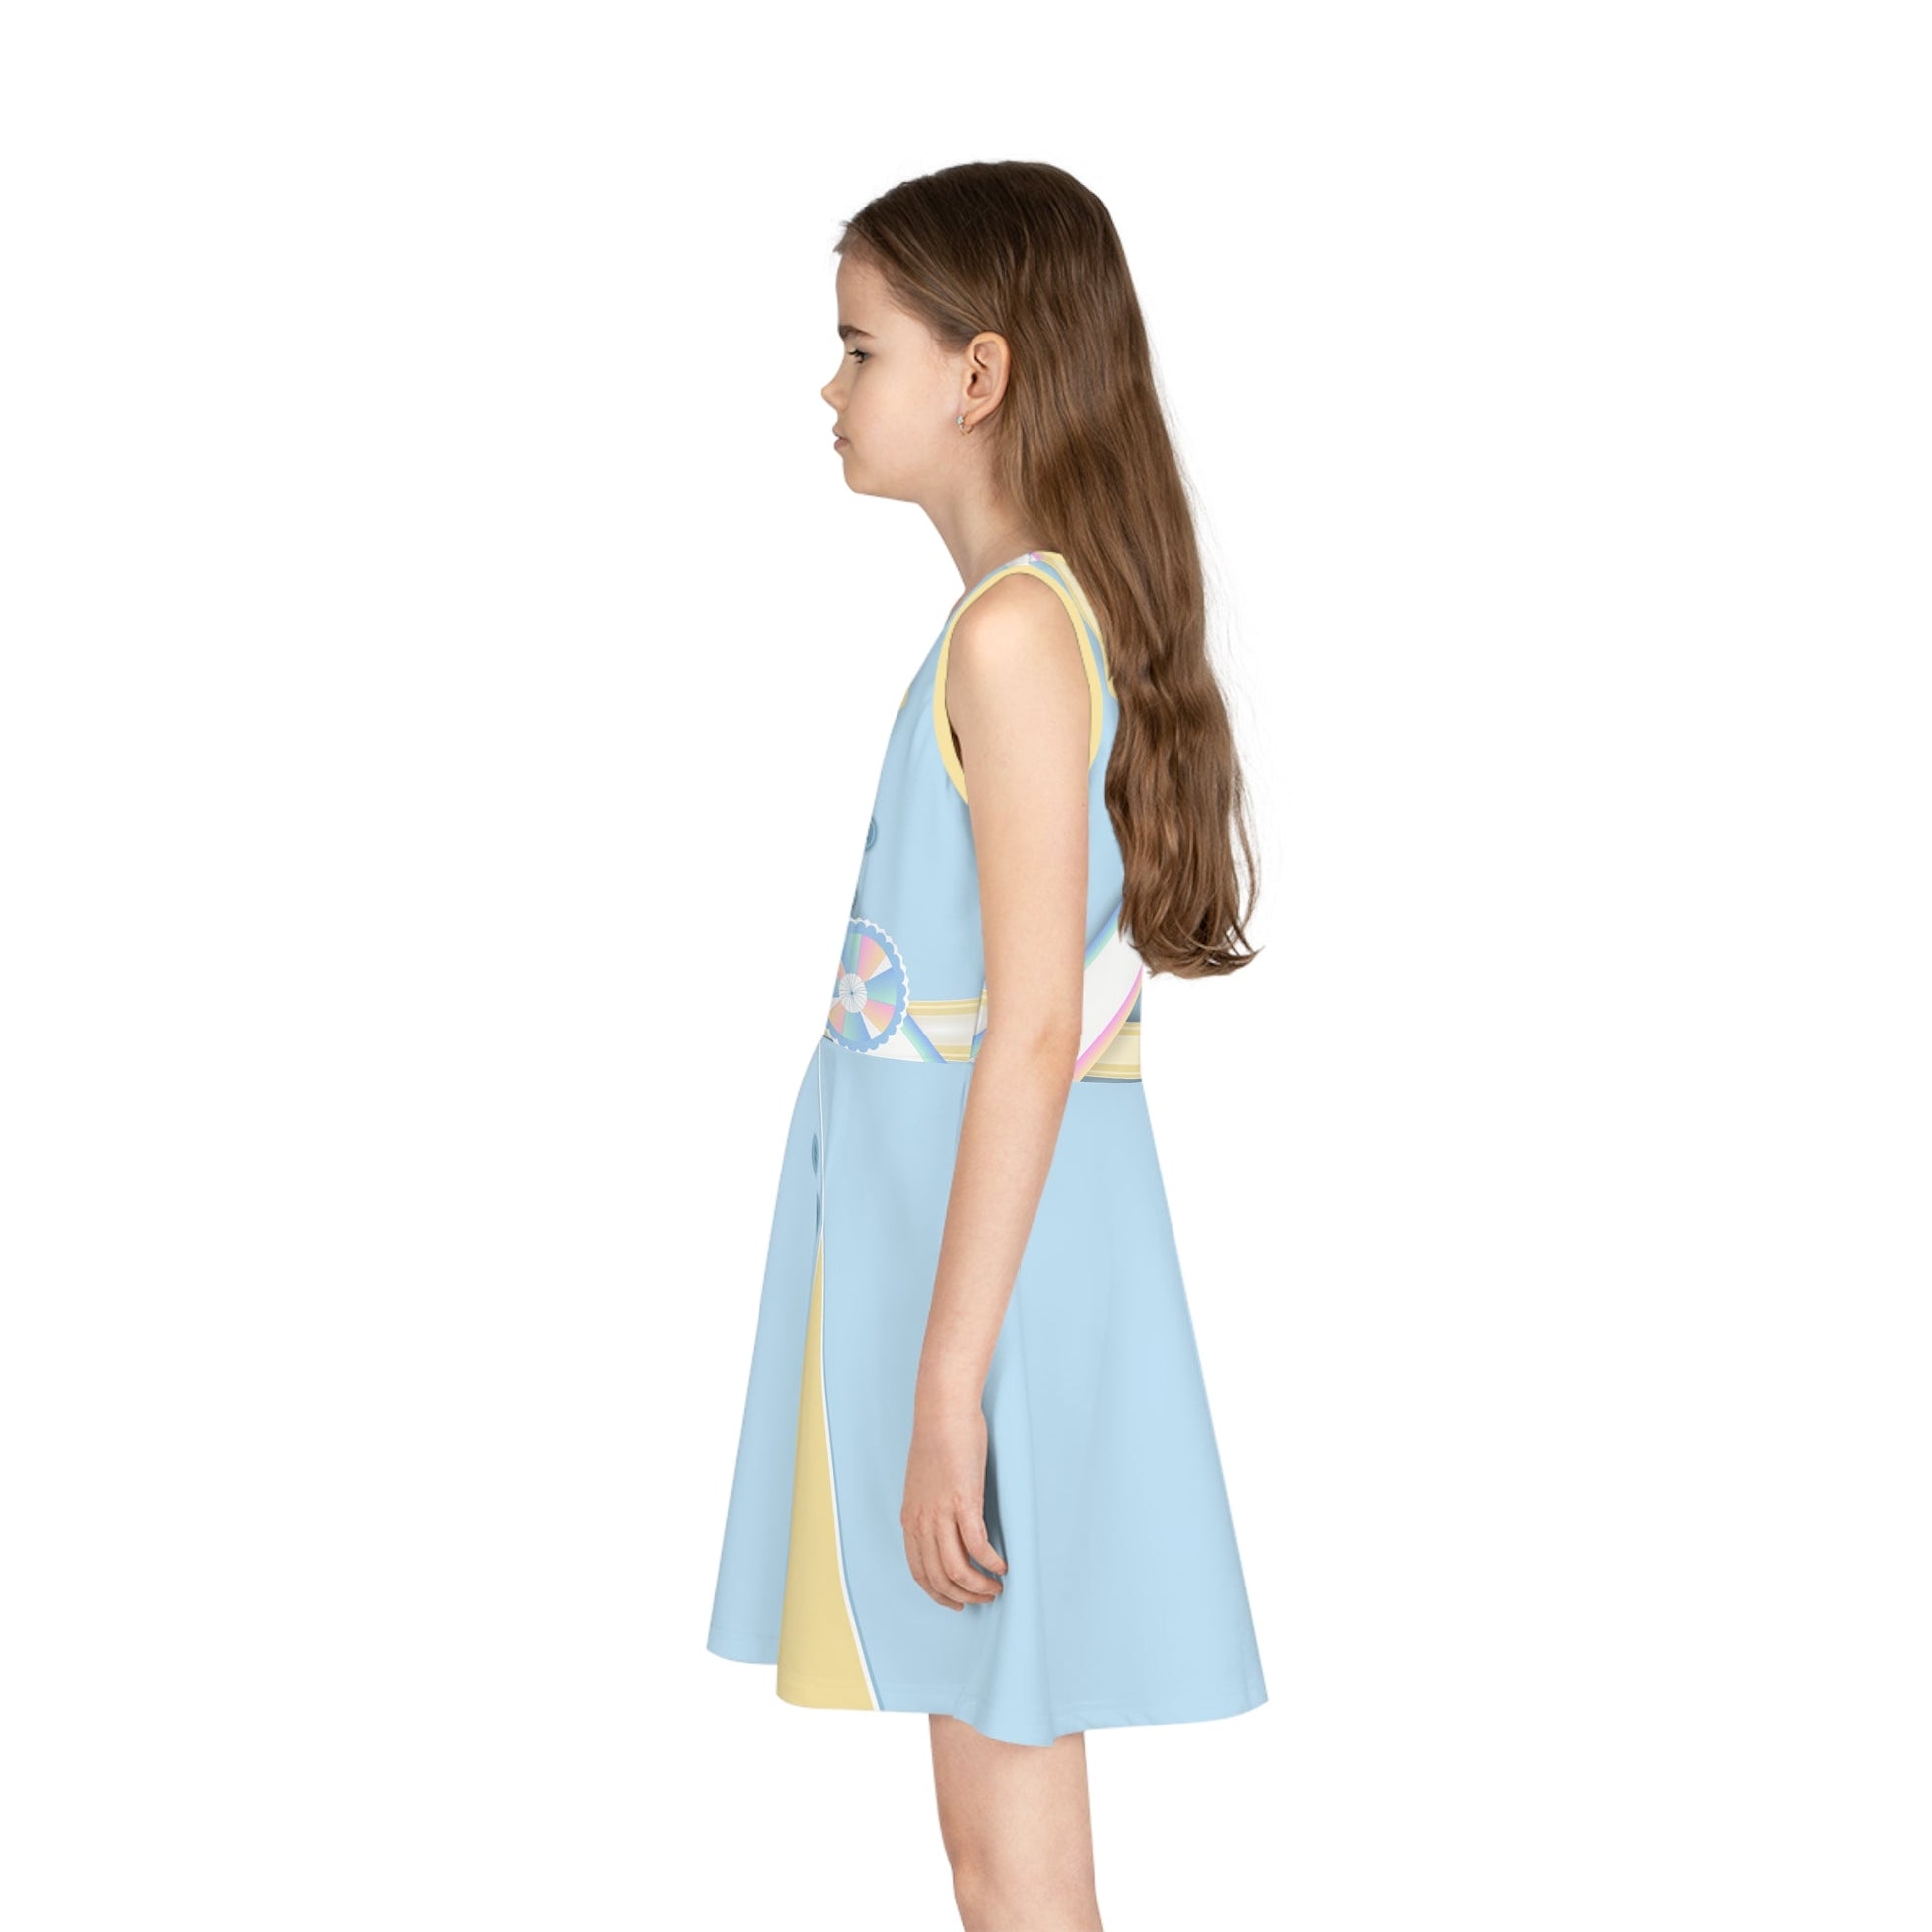 Women's Suffrage Girls' Sleeveless Sundress- costume, cosplay active wearAll Over Printkids dressLittle Lady Shay Boutique